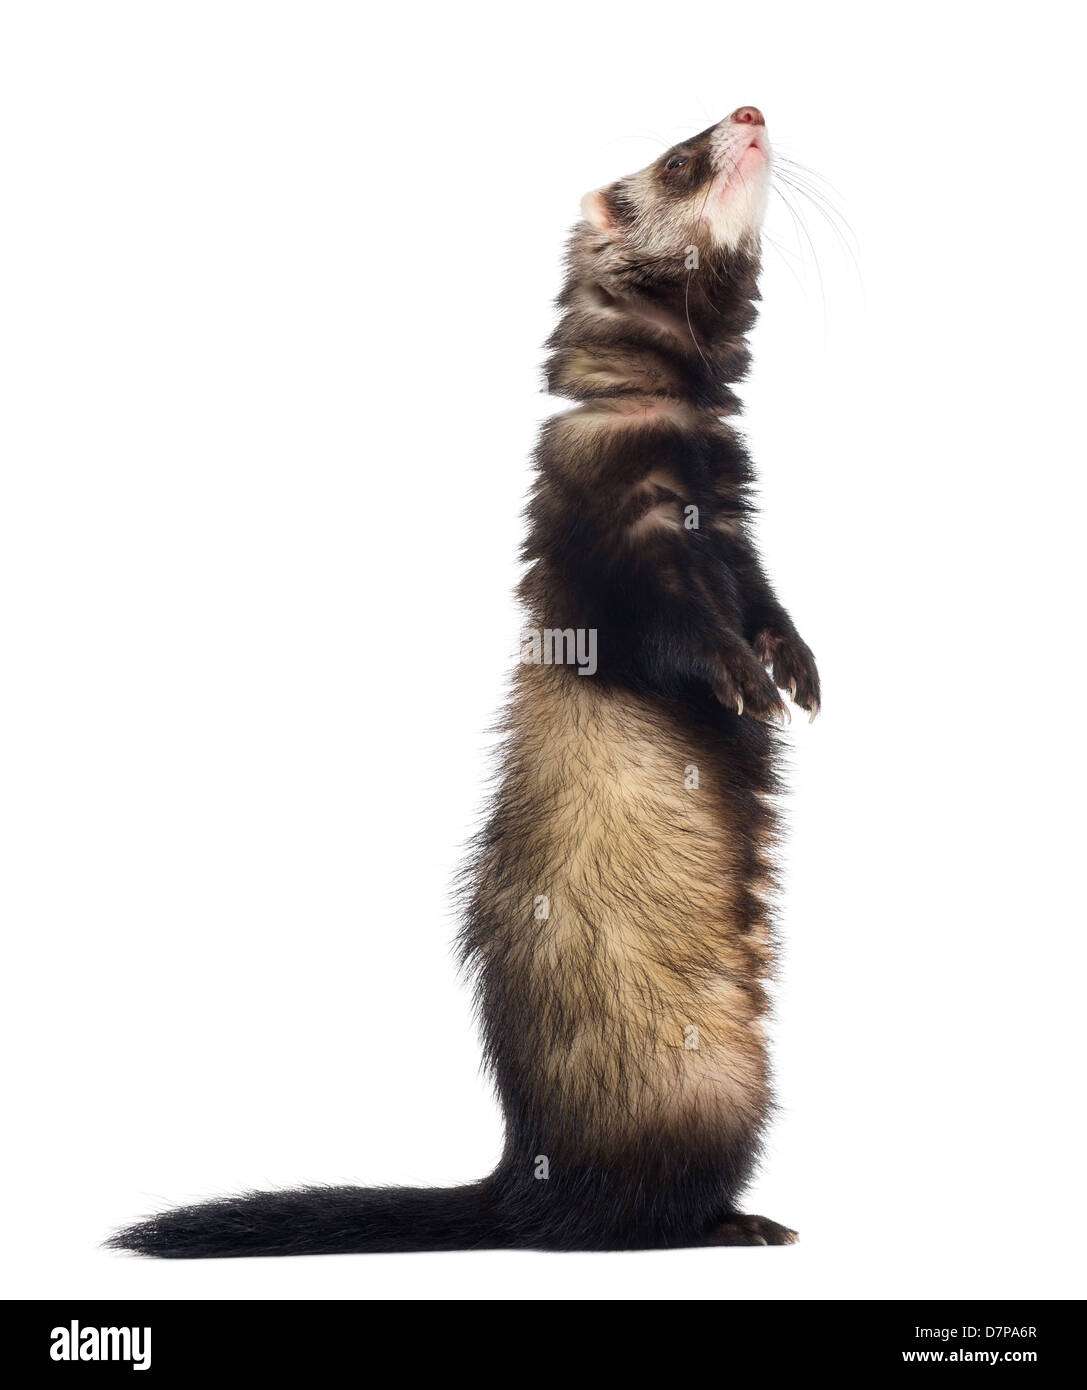 Side view of a Ferret, Mustela putorius furo, standing on hind legs and looking up, against white background Stock Photo